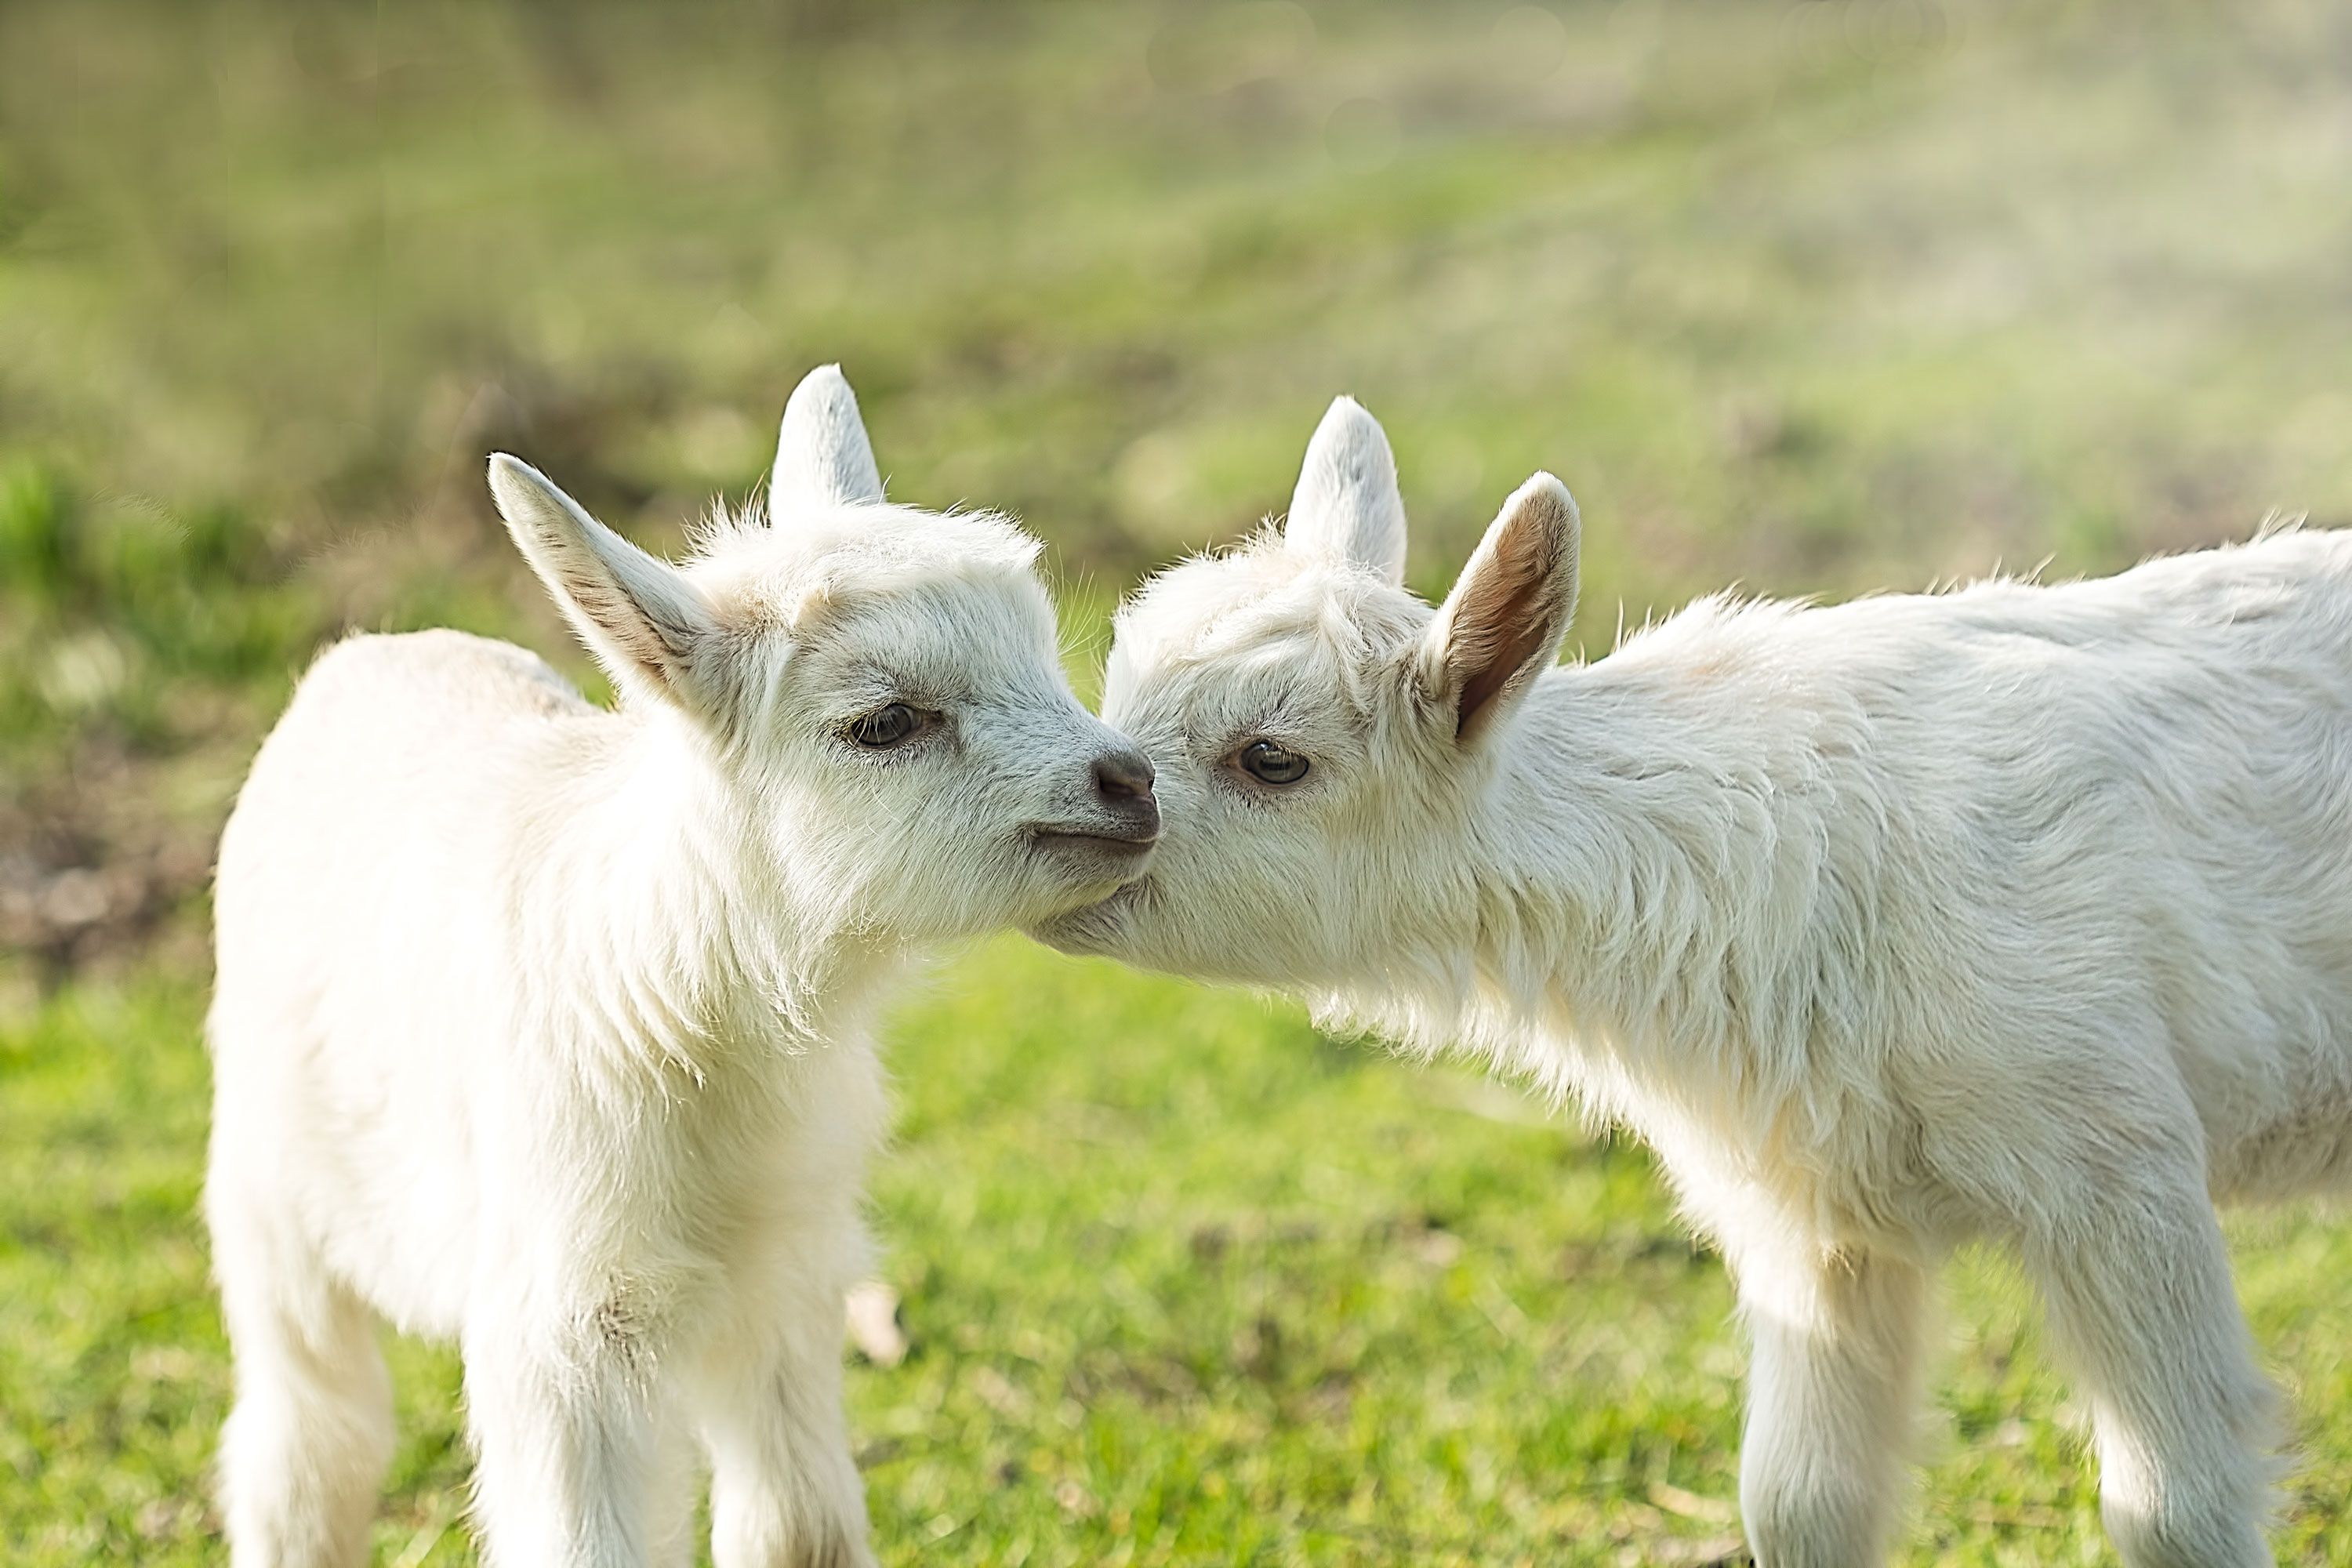 Goats Like It When You Smile at Them, Science Says